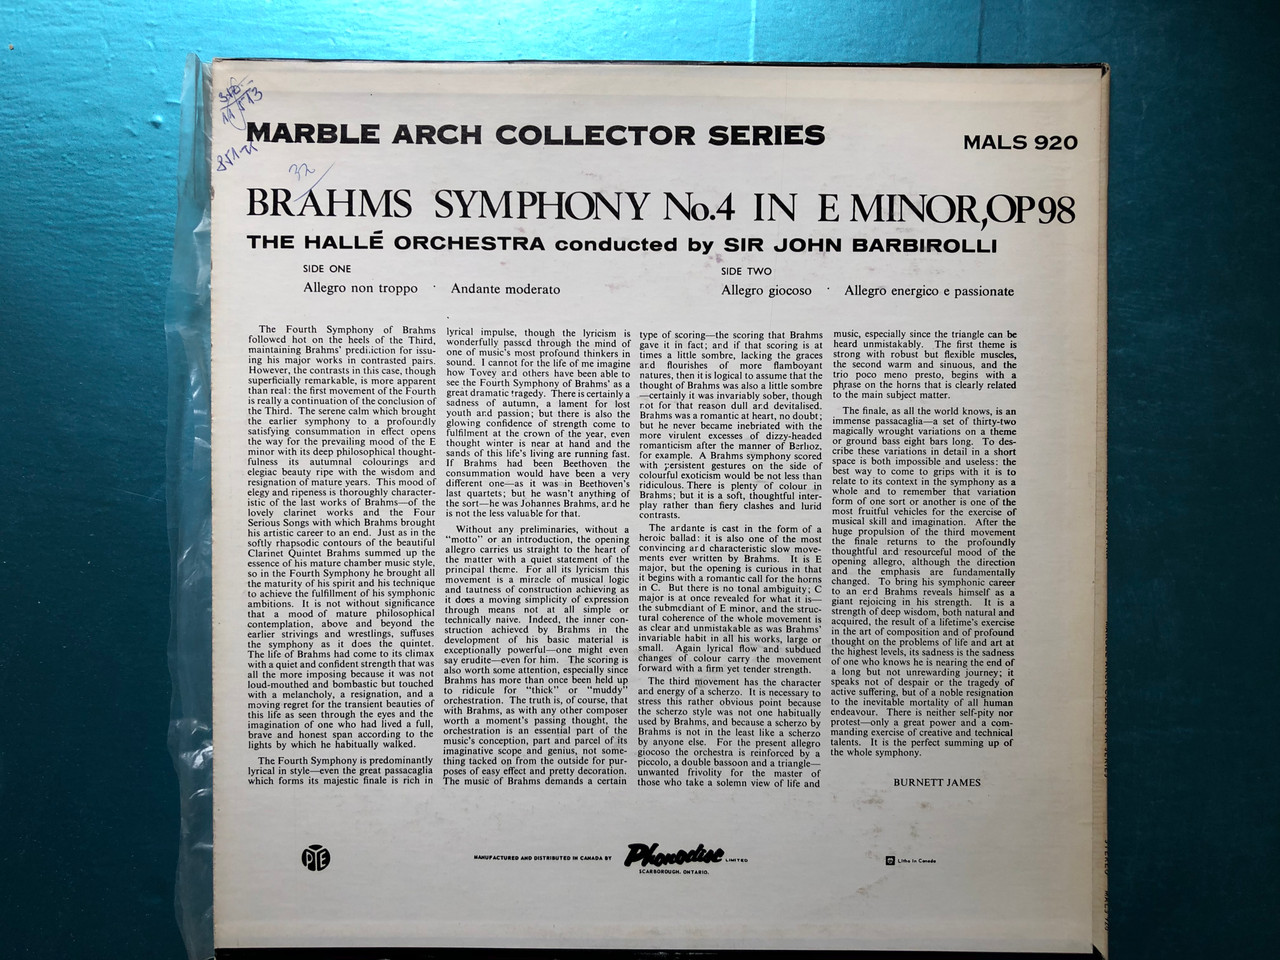 https://cdn10.bigcommerce.com/s-62bdpkt7pb/products/30644/images/181092/Brahms_-_Symphony_No._4_In_E_Minor_OPUS_98_Sir_John_Barbirolli_The_Halle_Orchestra_Marble_Arch_Collector_Series_Marble_Arch_LP_Stereo_MALS_920_2__68960.1623422733.1280.1280.JPG?c=2